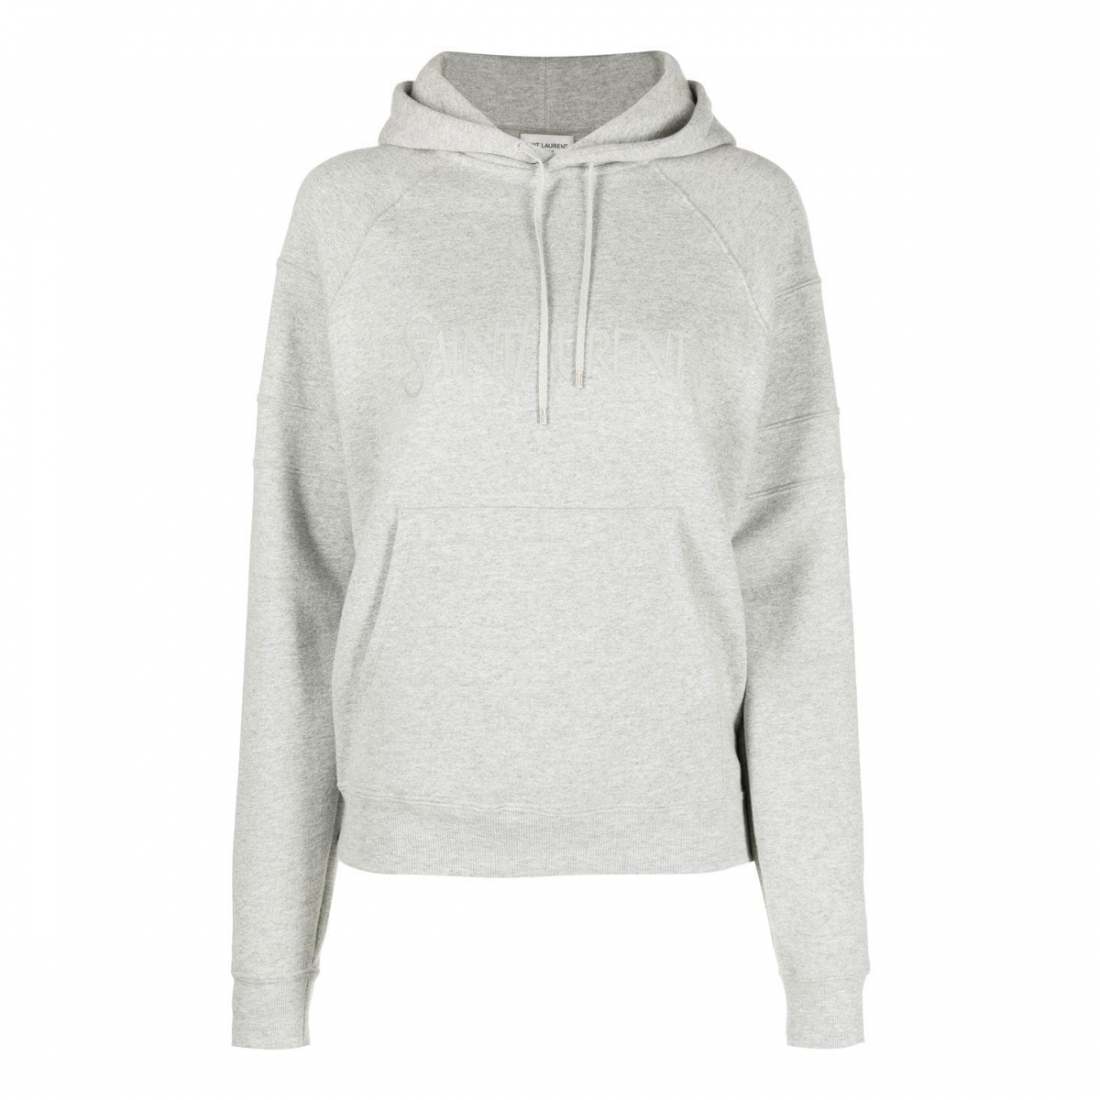 Women's 'Embroidered Logo' Hoodie